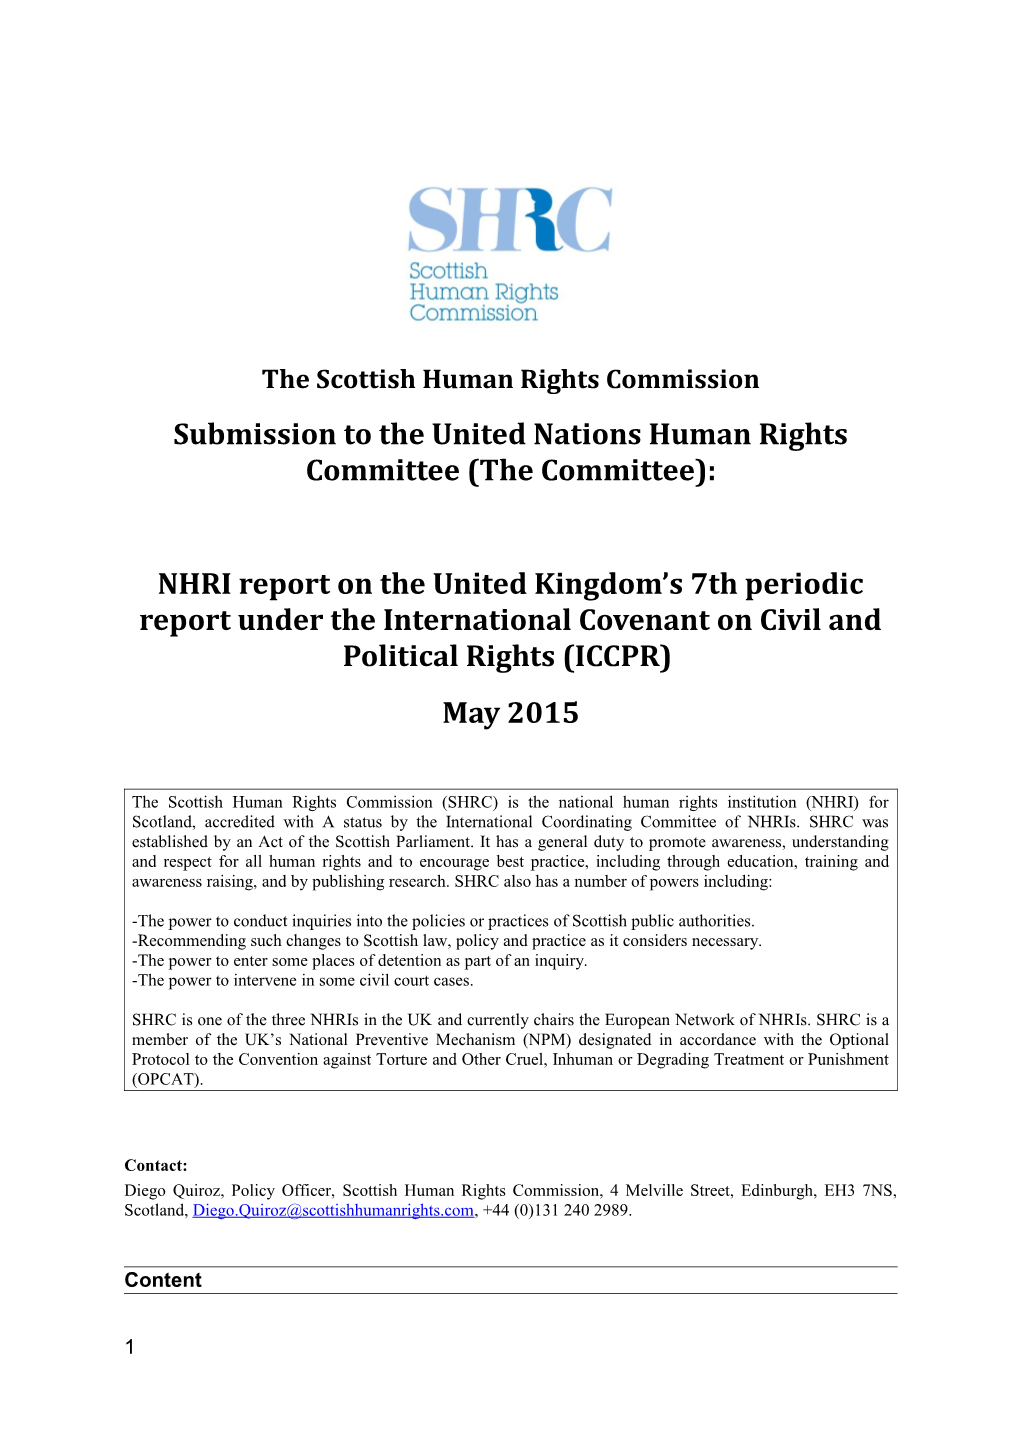 The Scottish Human Rights Commission